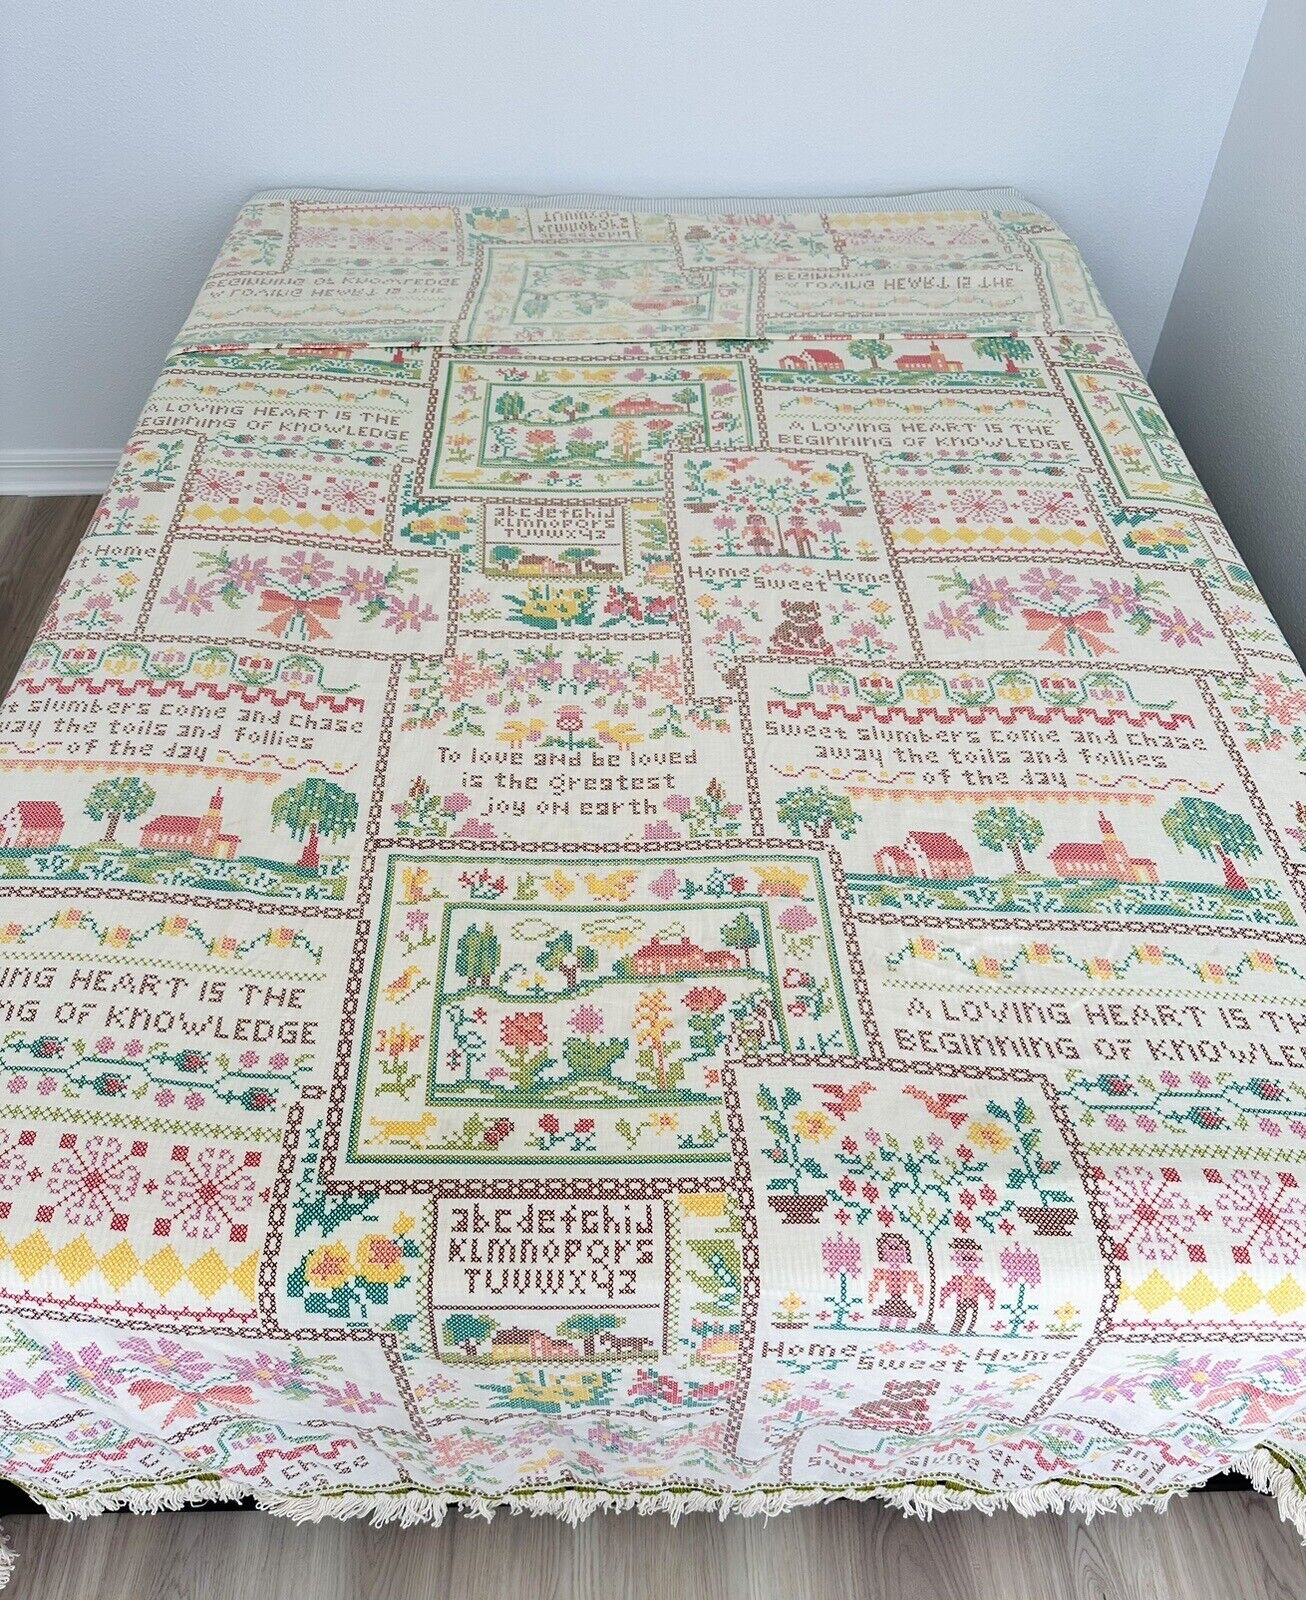 1960s Sears Cross Stitch Print Bedspread Cover, Fringe, Vintage Home Sweet Home